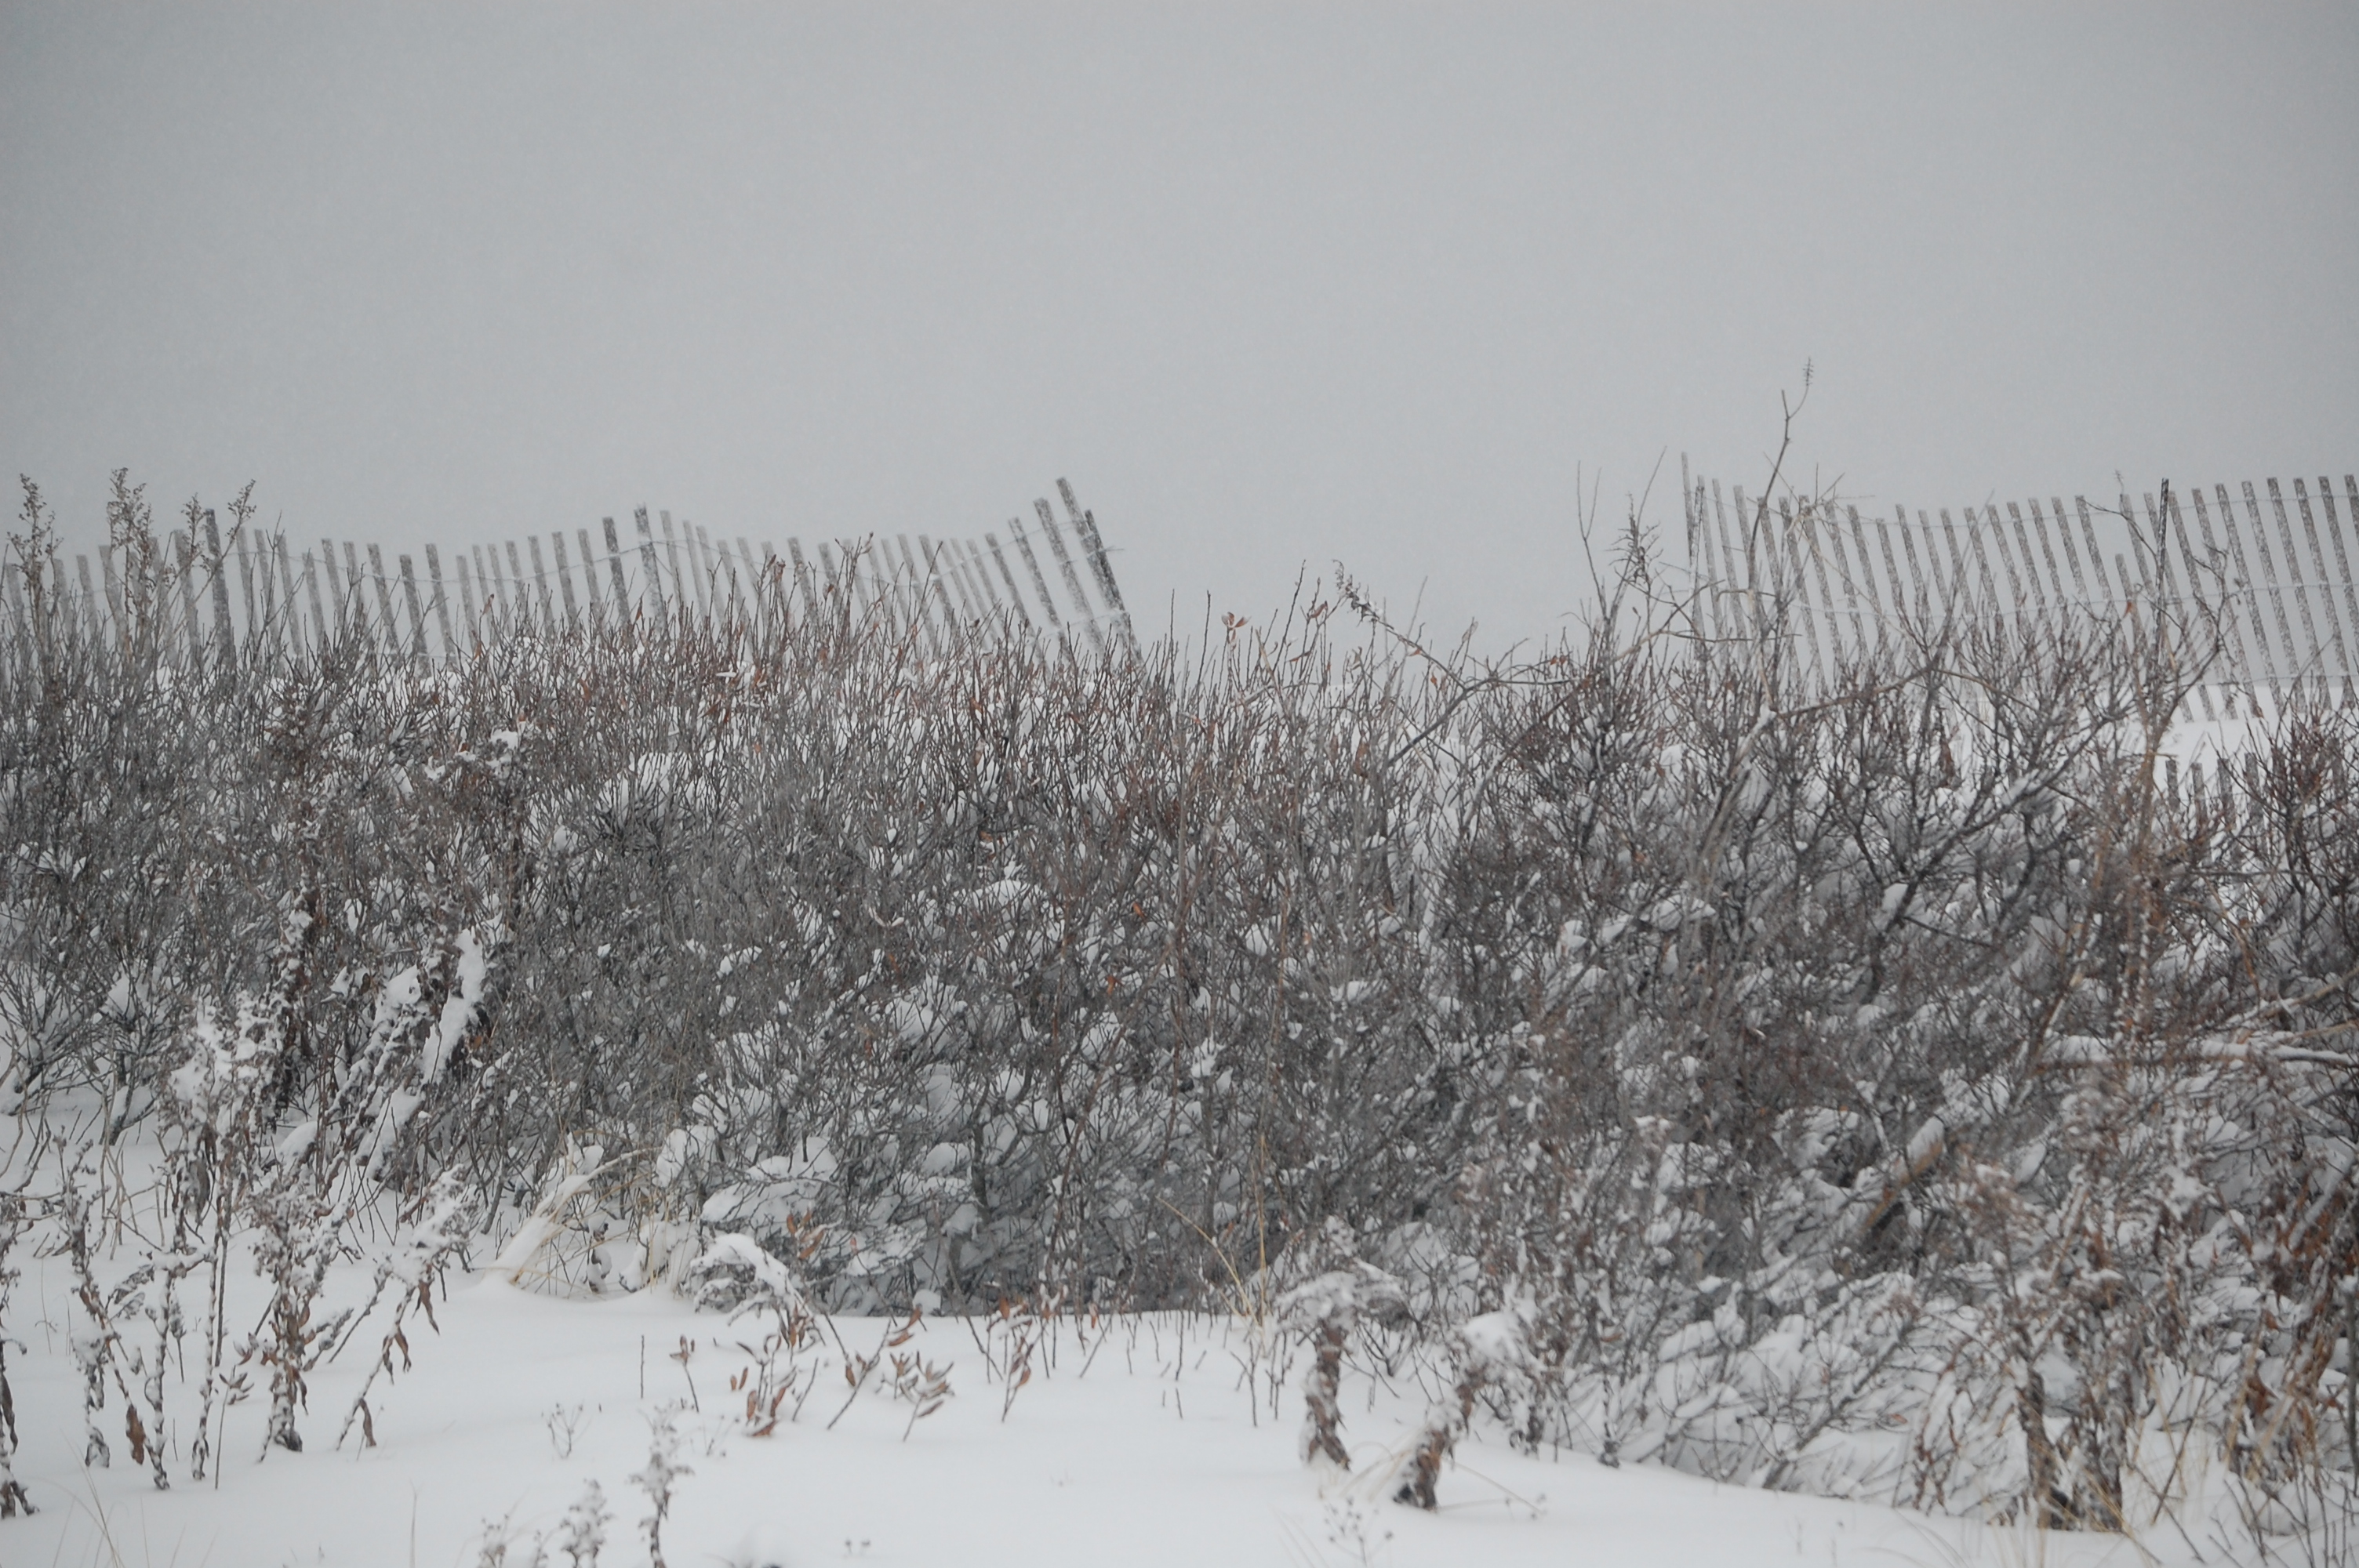 Brick Beach III during the March 5, 2015 snow storm. (Photo: Daniel Nee) Click to expand.